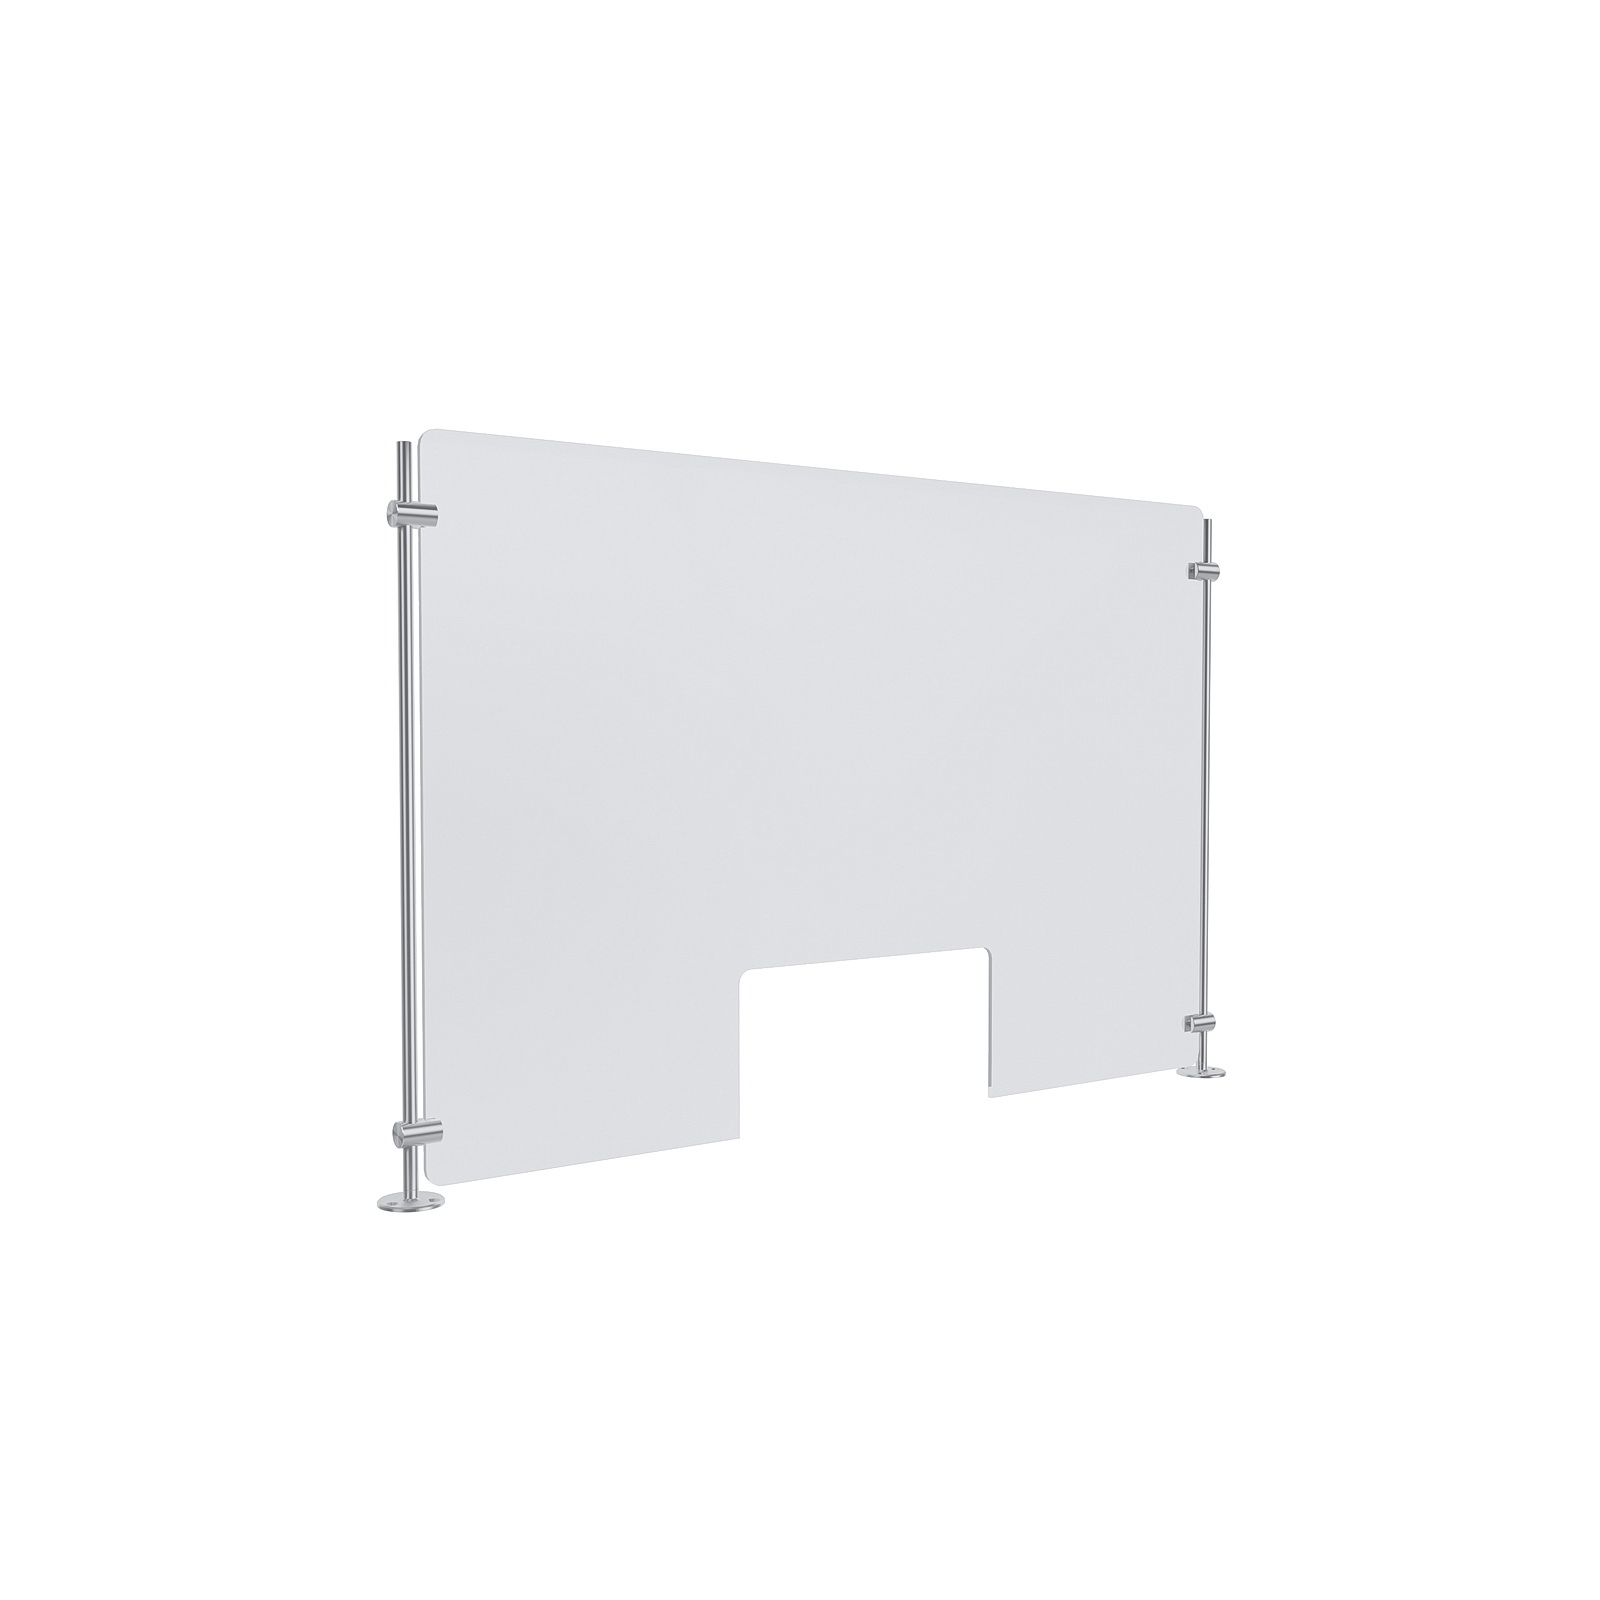 Clear Acrylic Sneeze Guard 30'' Wide x 20'' Tall (10'' x 5'' Cut Out), with (2) 20'' Tall x 3/8'' Diameter Clear Anodized Aluminum Rod on the Side..